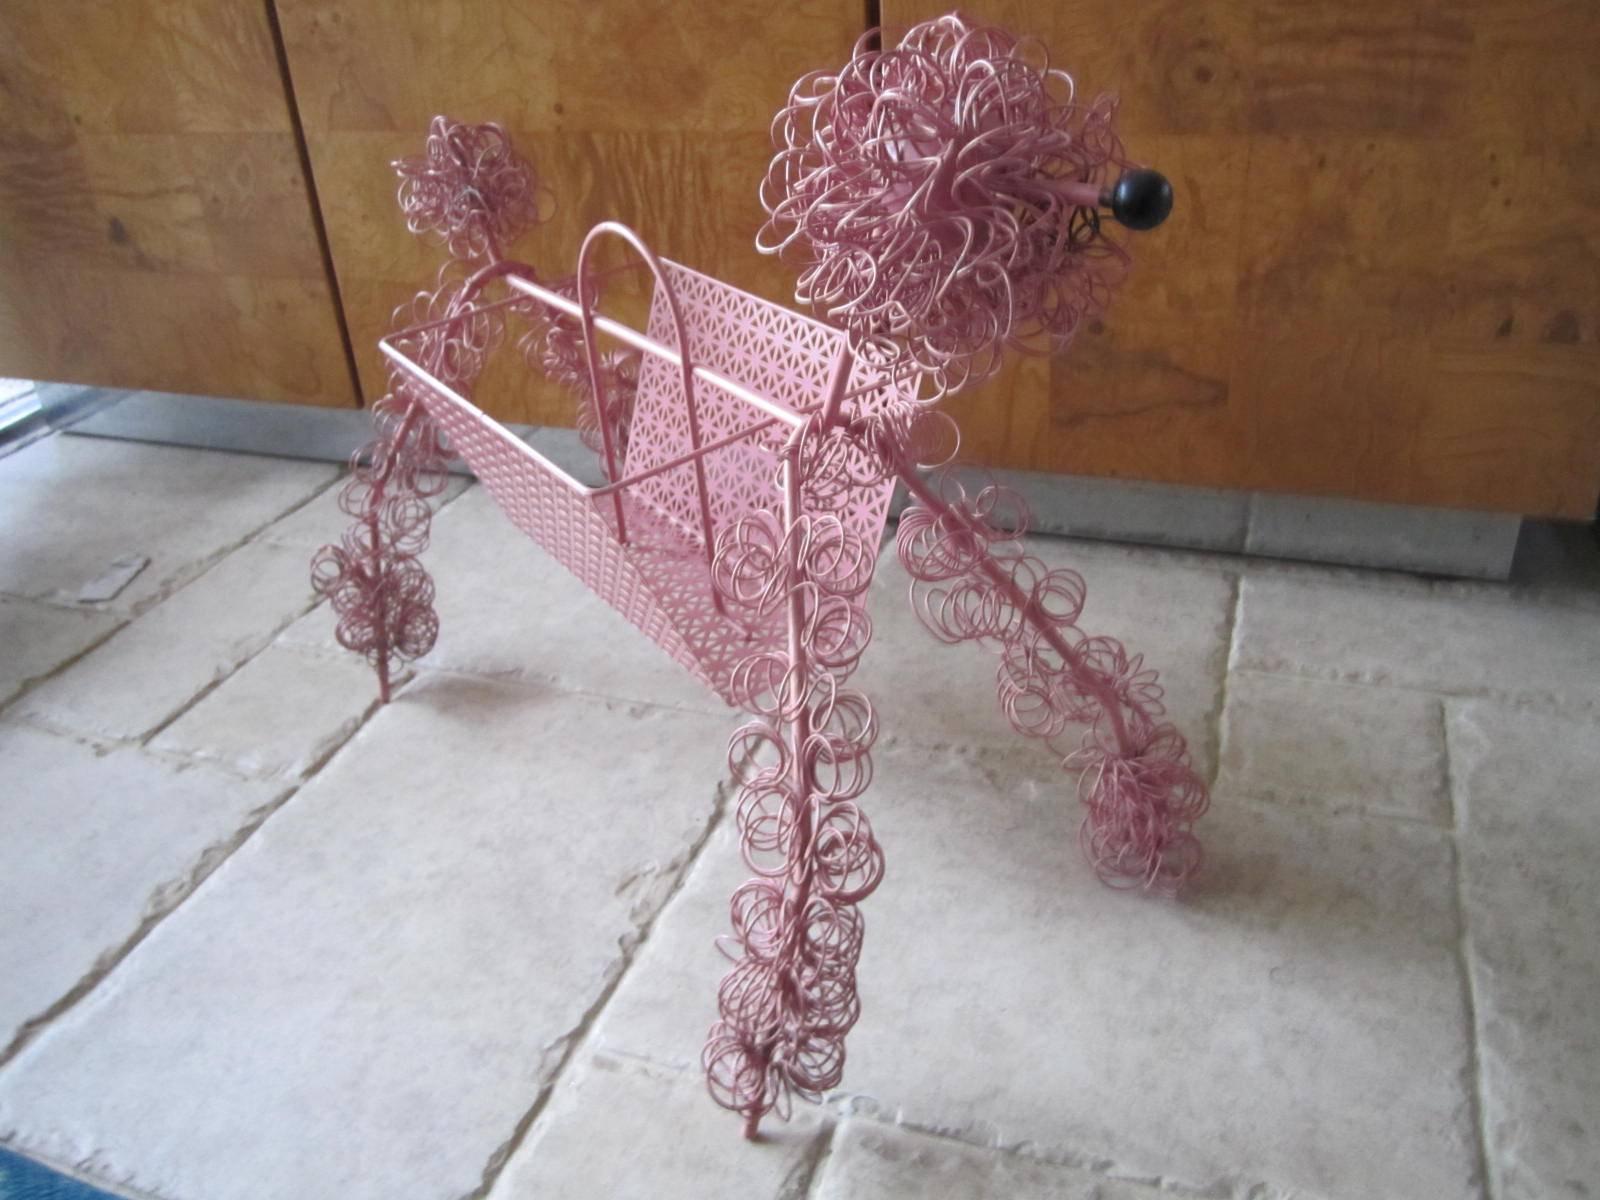 Mid-Century Modern Fun Whimsical Weinberg 1950s Pink Poodle Magazine Rack For Sale